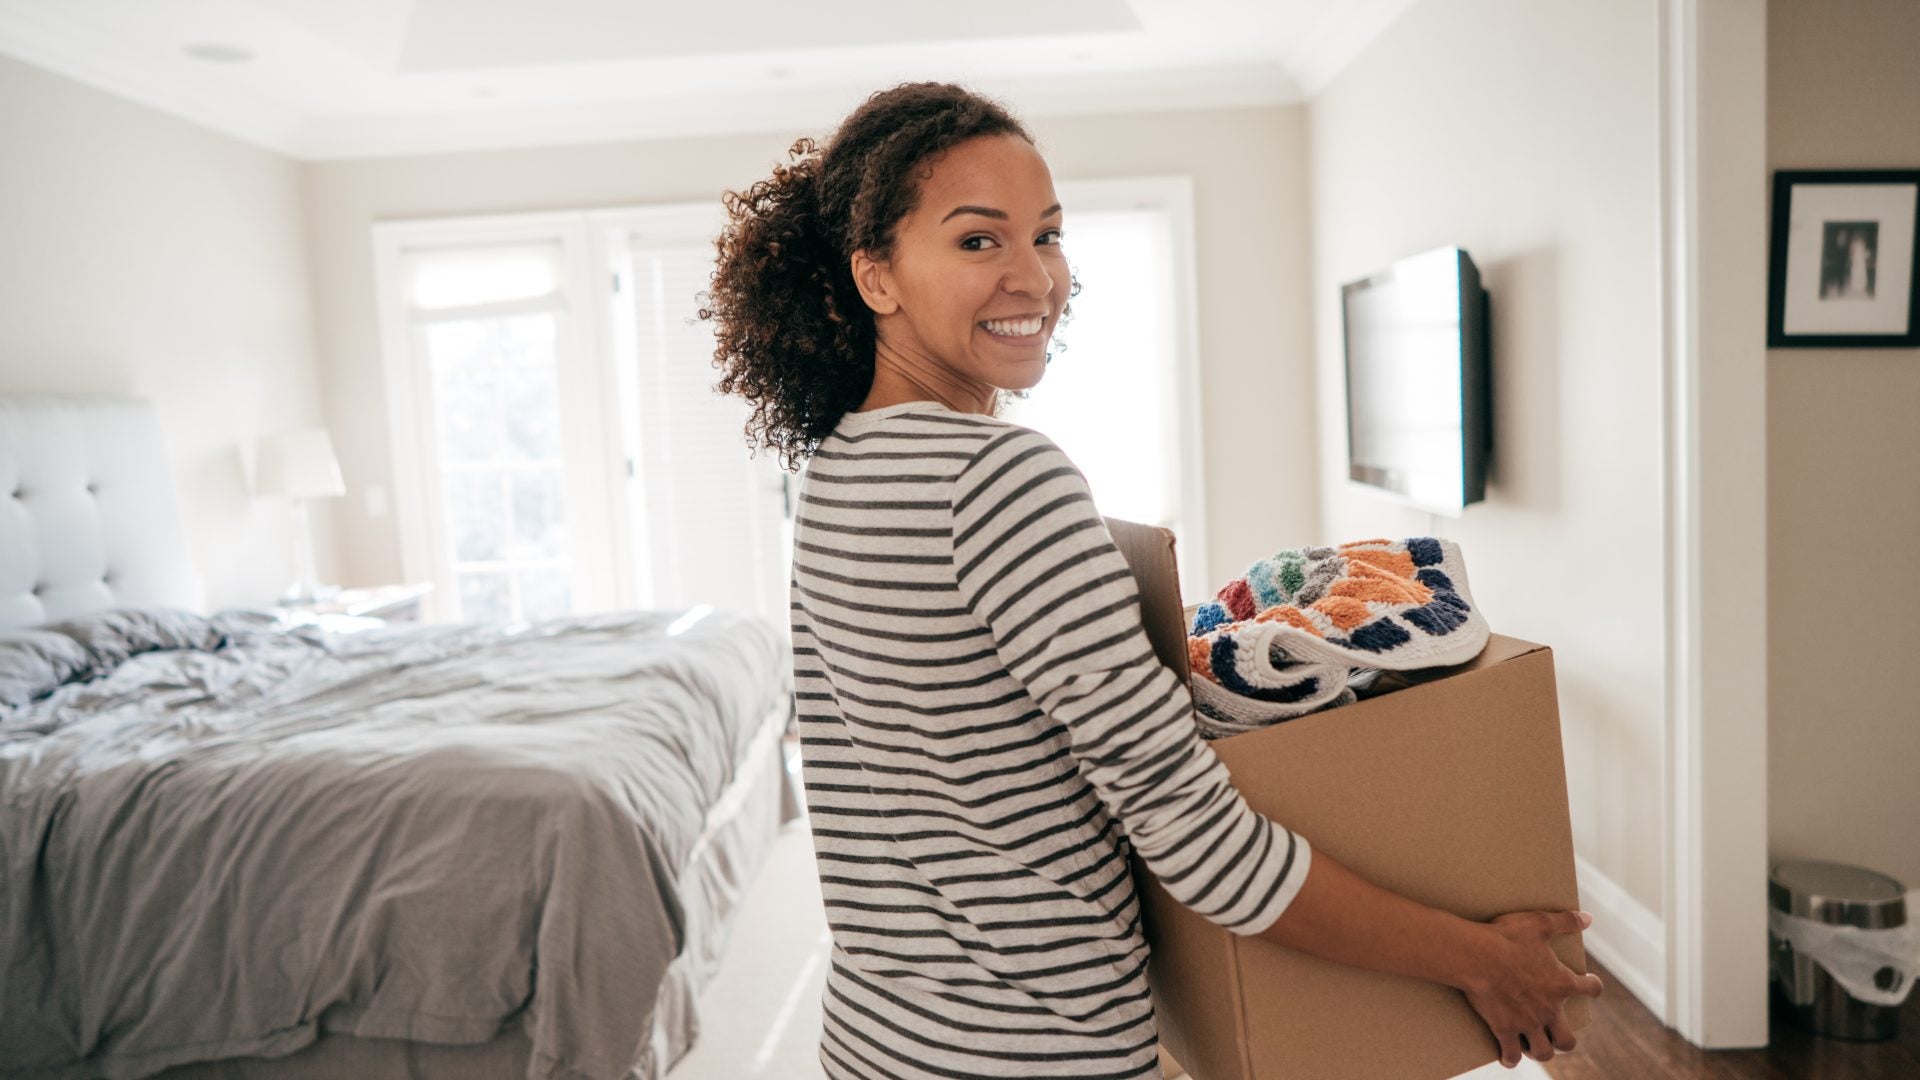 Spring Awakening: A Guide To Downsizing And Decluttering. Here’s 16 Tips To Help Get You Started